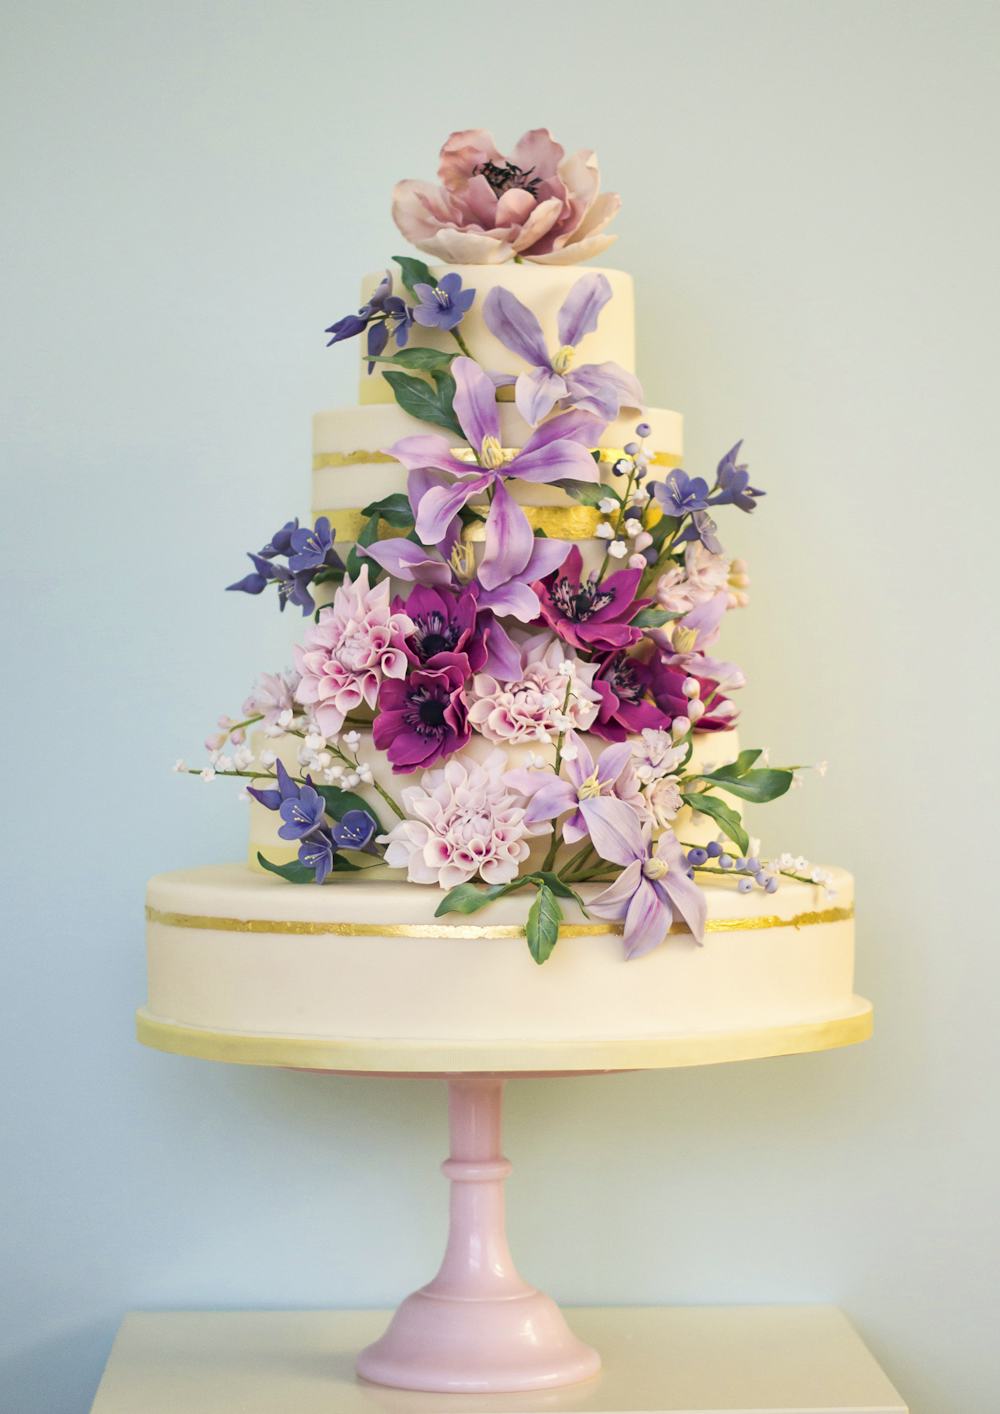 3 ideas for your wedding cake